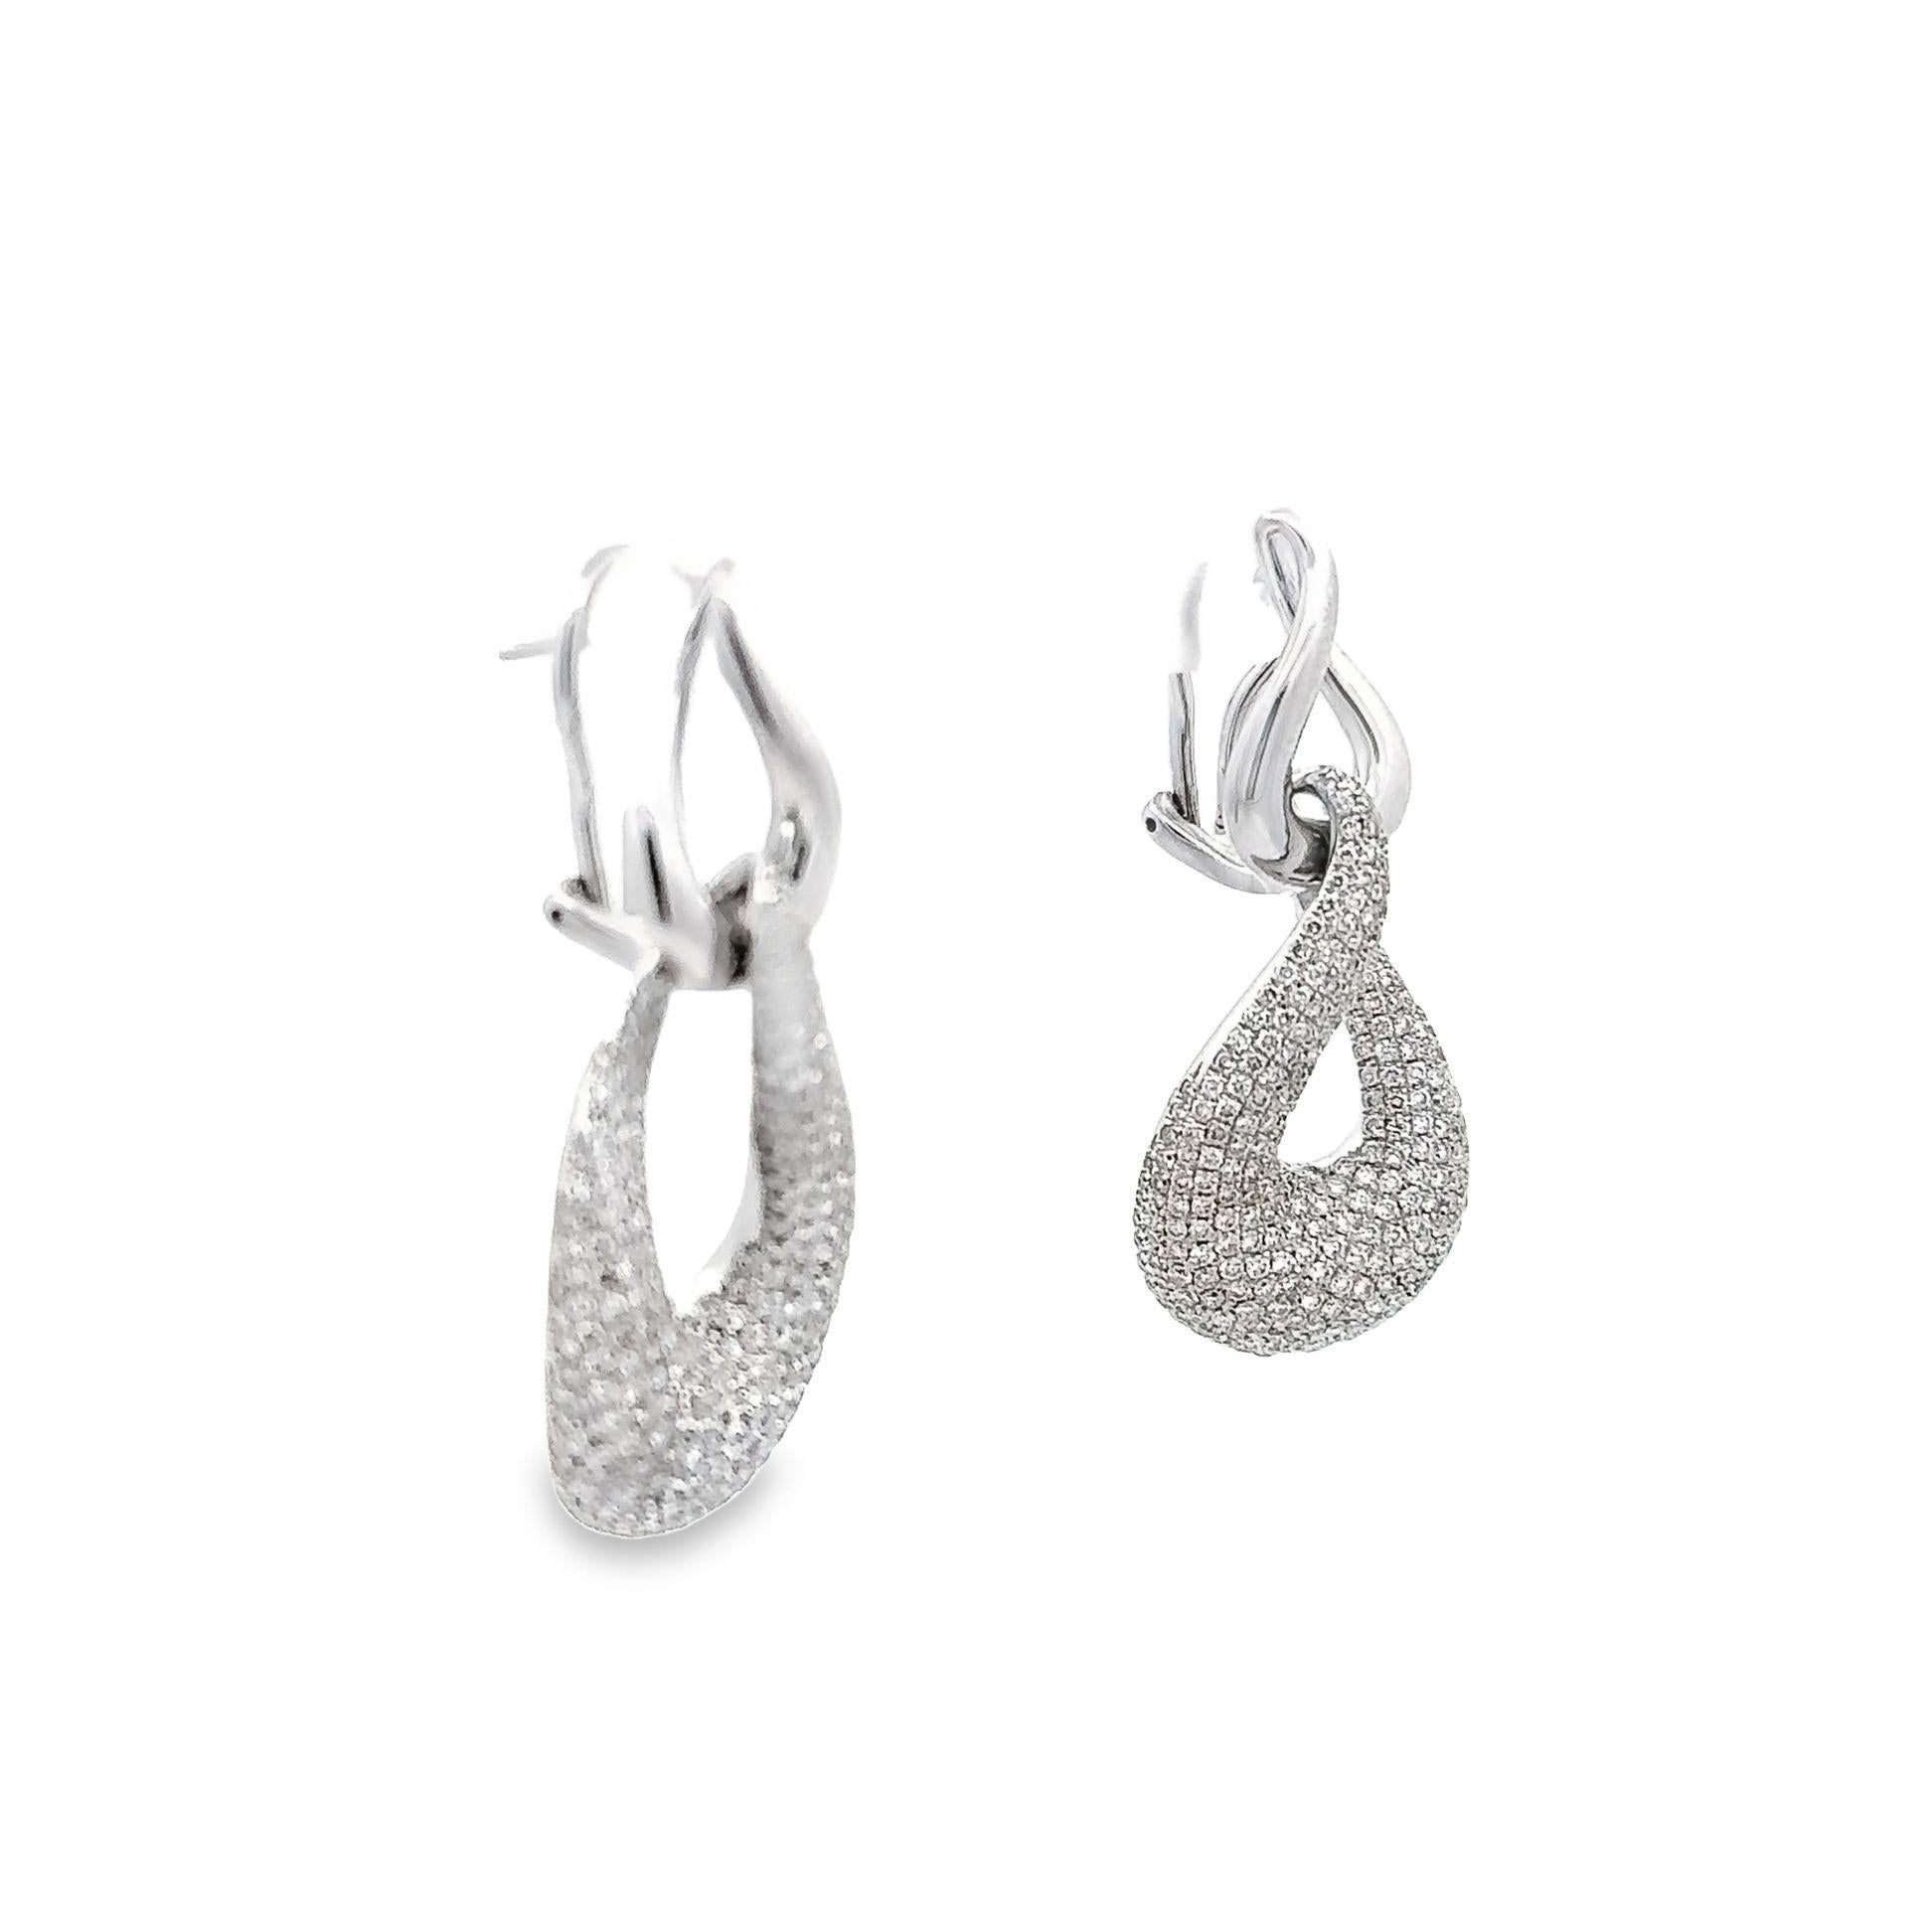 Elevate your look and make a statement with these stunning teardrop earrings with its 3.69 carats of pave-set round brilliant-cut diamonds. Crafted with a sharp sense of detail and nestled within organic shapes are sparkling teardrops, each one